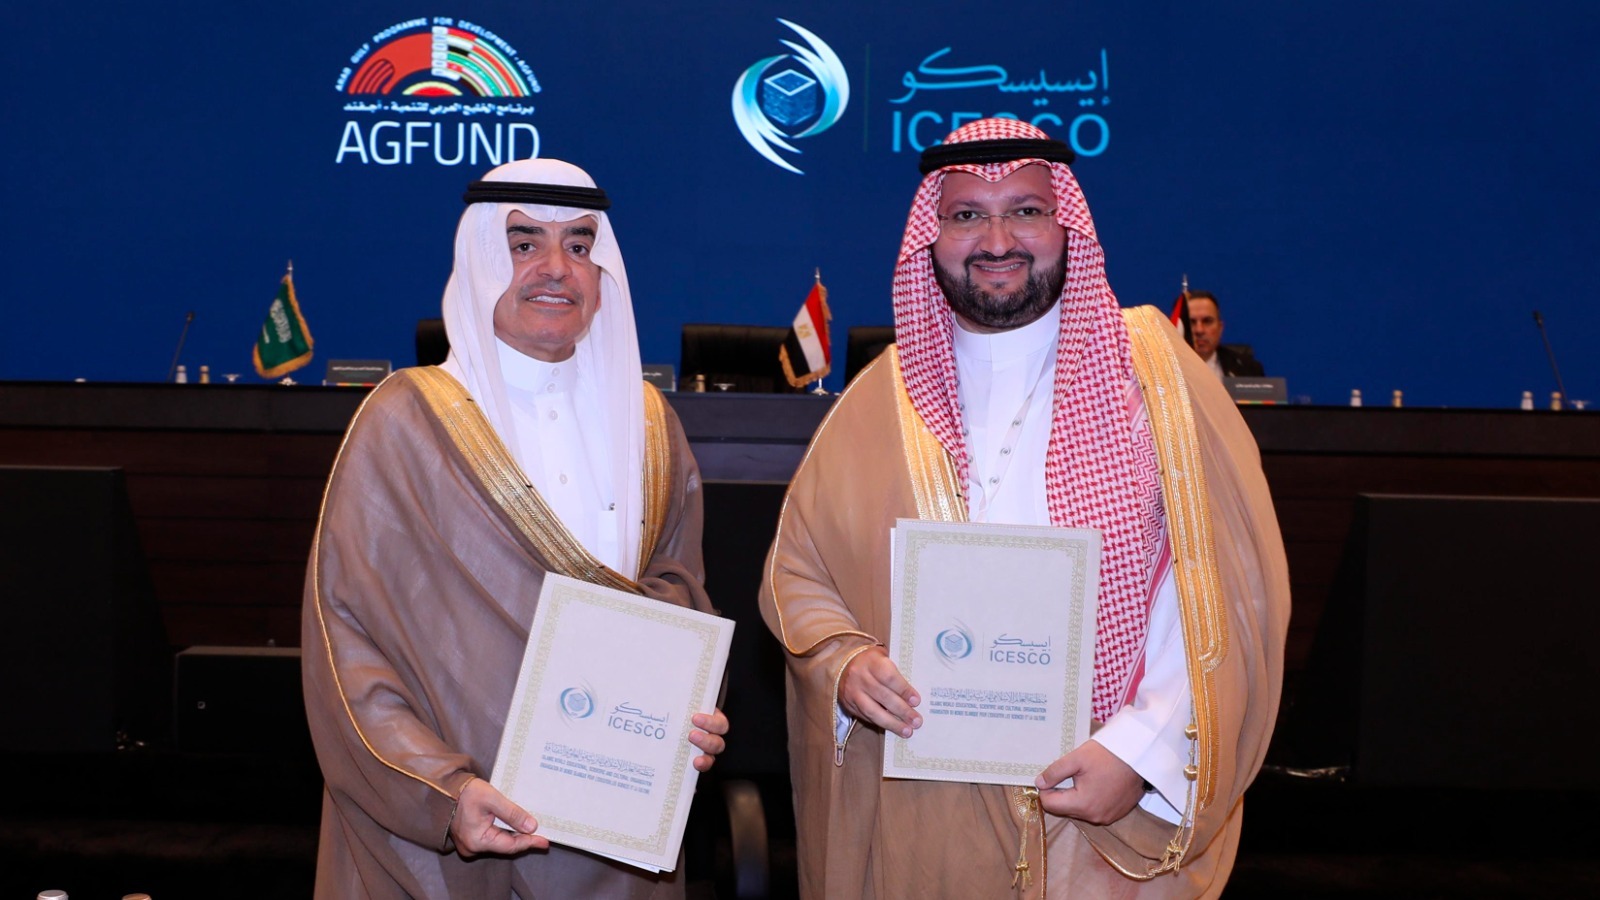 ICESCO and AGFUND sign MoU to promote cooperation in blended education and community development